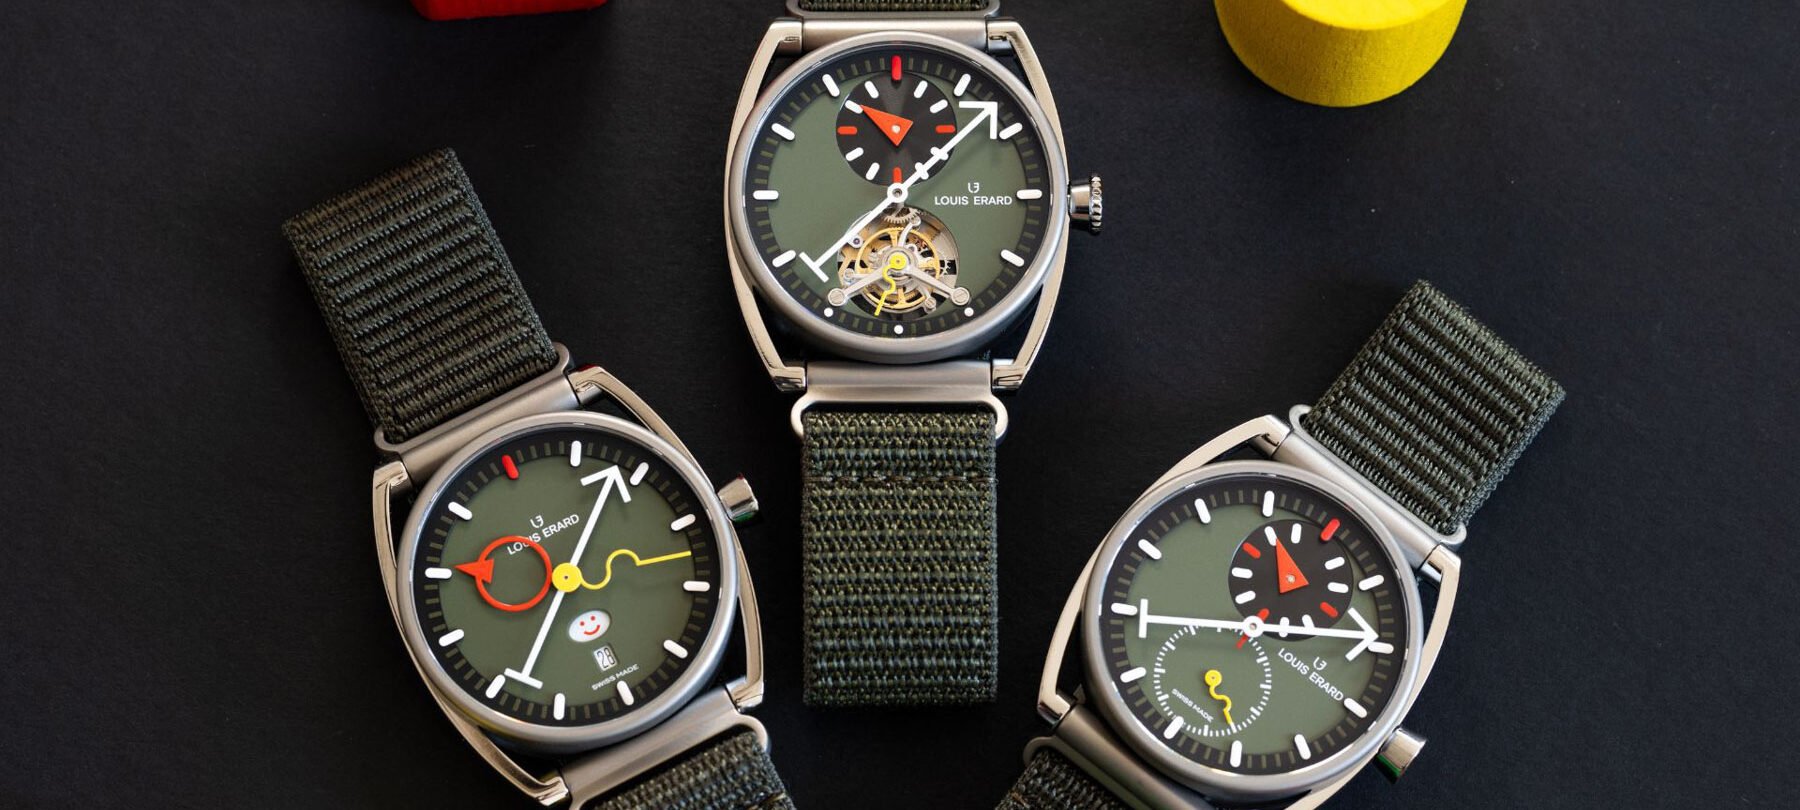 Introducing: The New Le Triptyque Louis Erard × Alain Silberstein In Contemporary Khaki